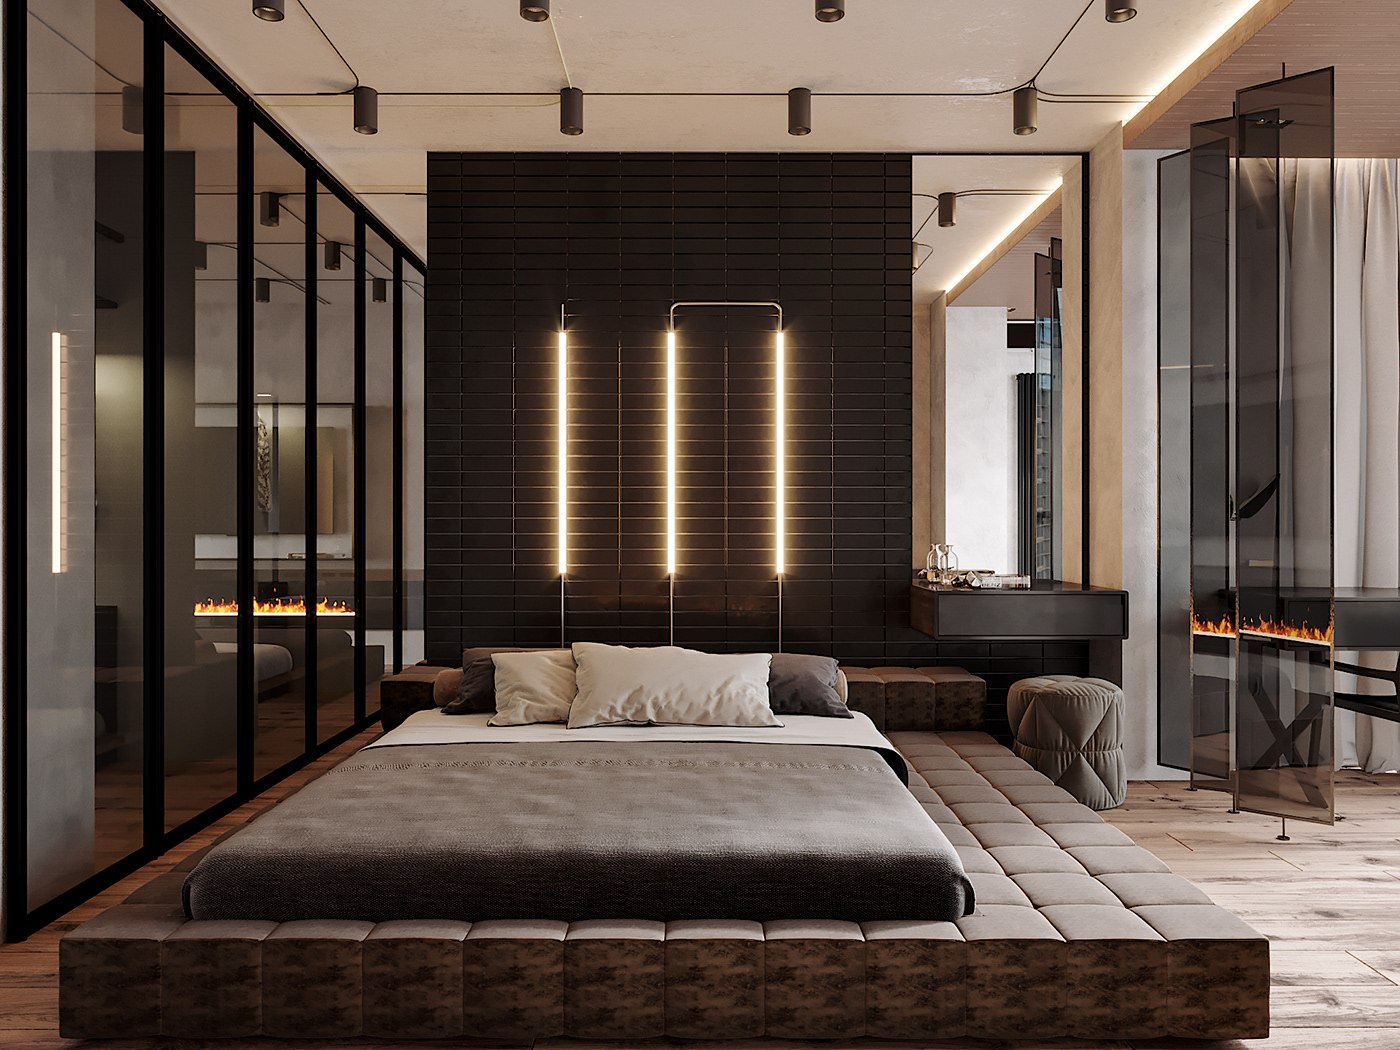 Japanese minimalism for real bedroom with log platform bed, glass wall and dark wooden background